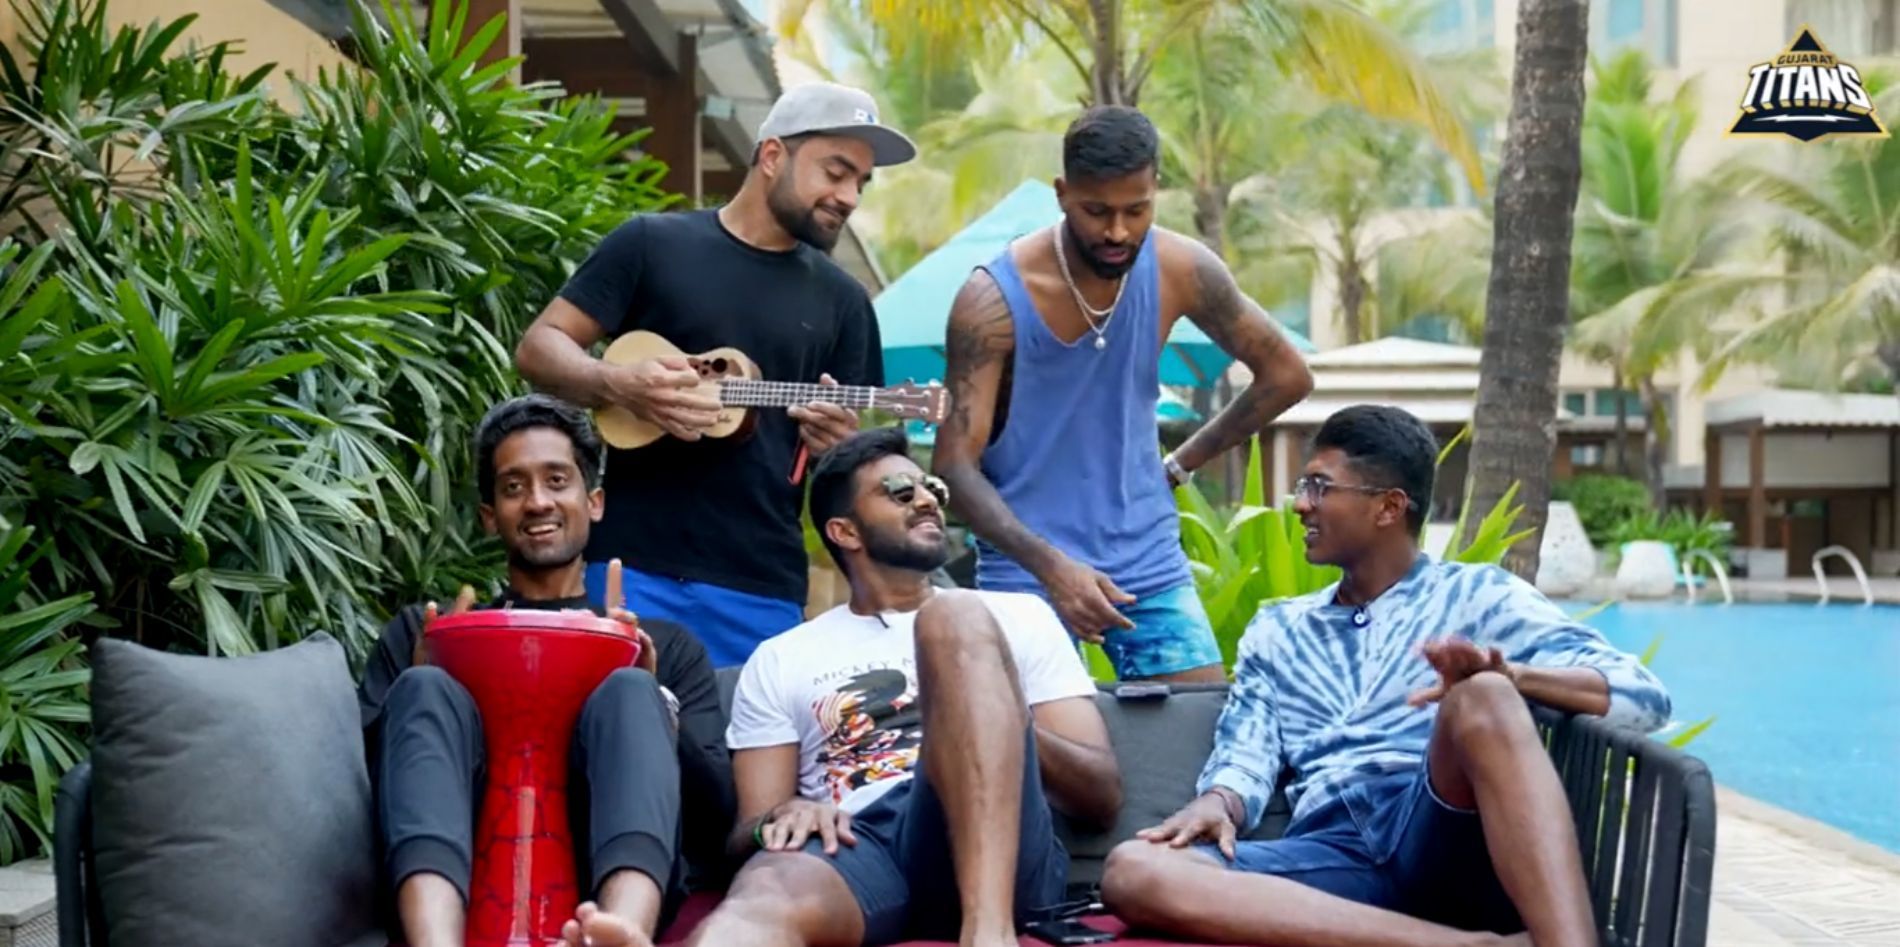 Gujarat Titans players bond over music. Pic: GT/ Twitter